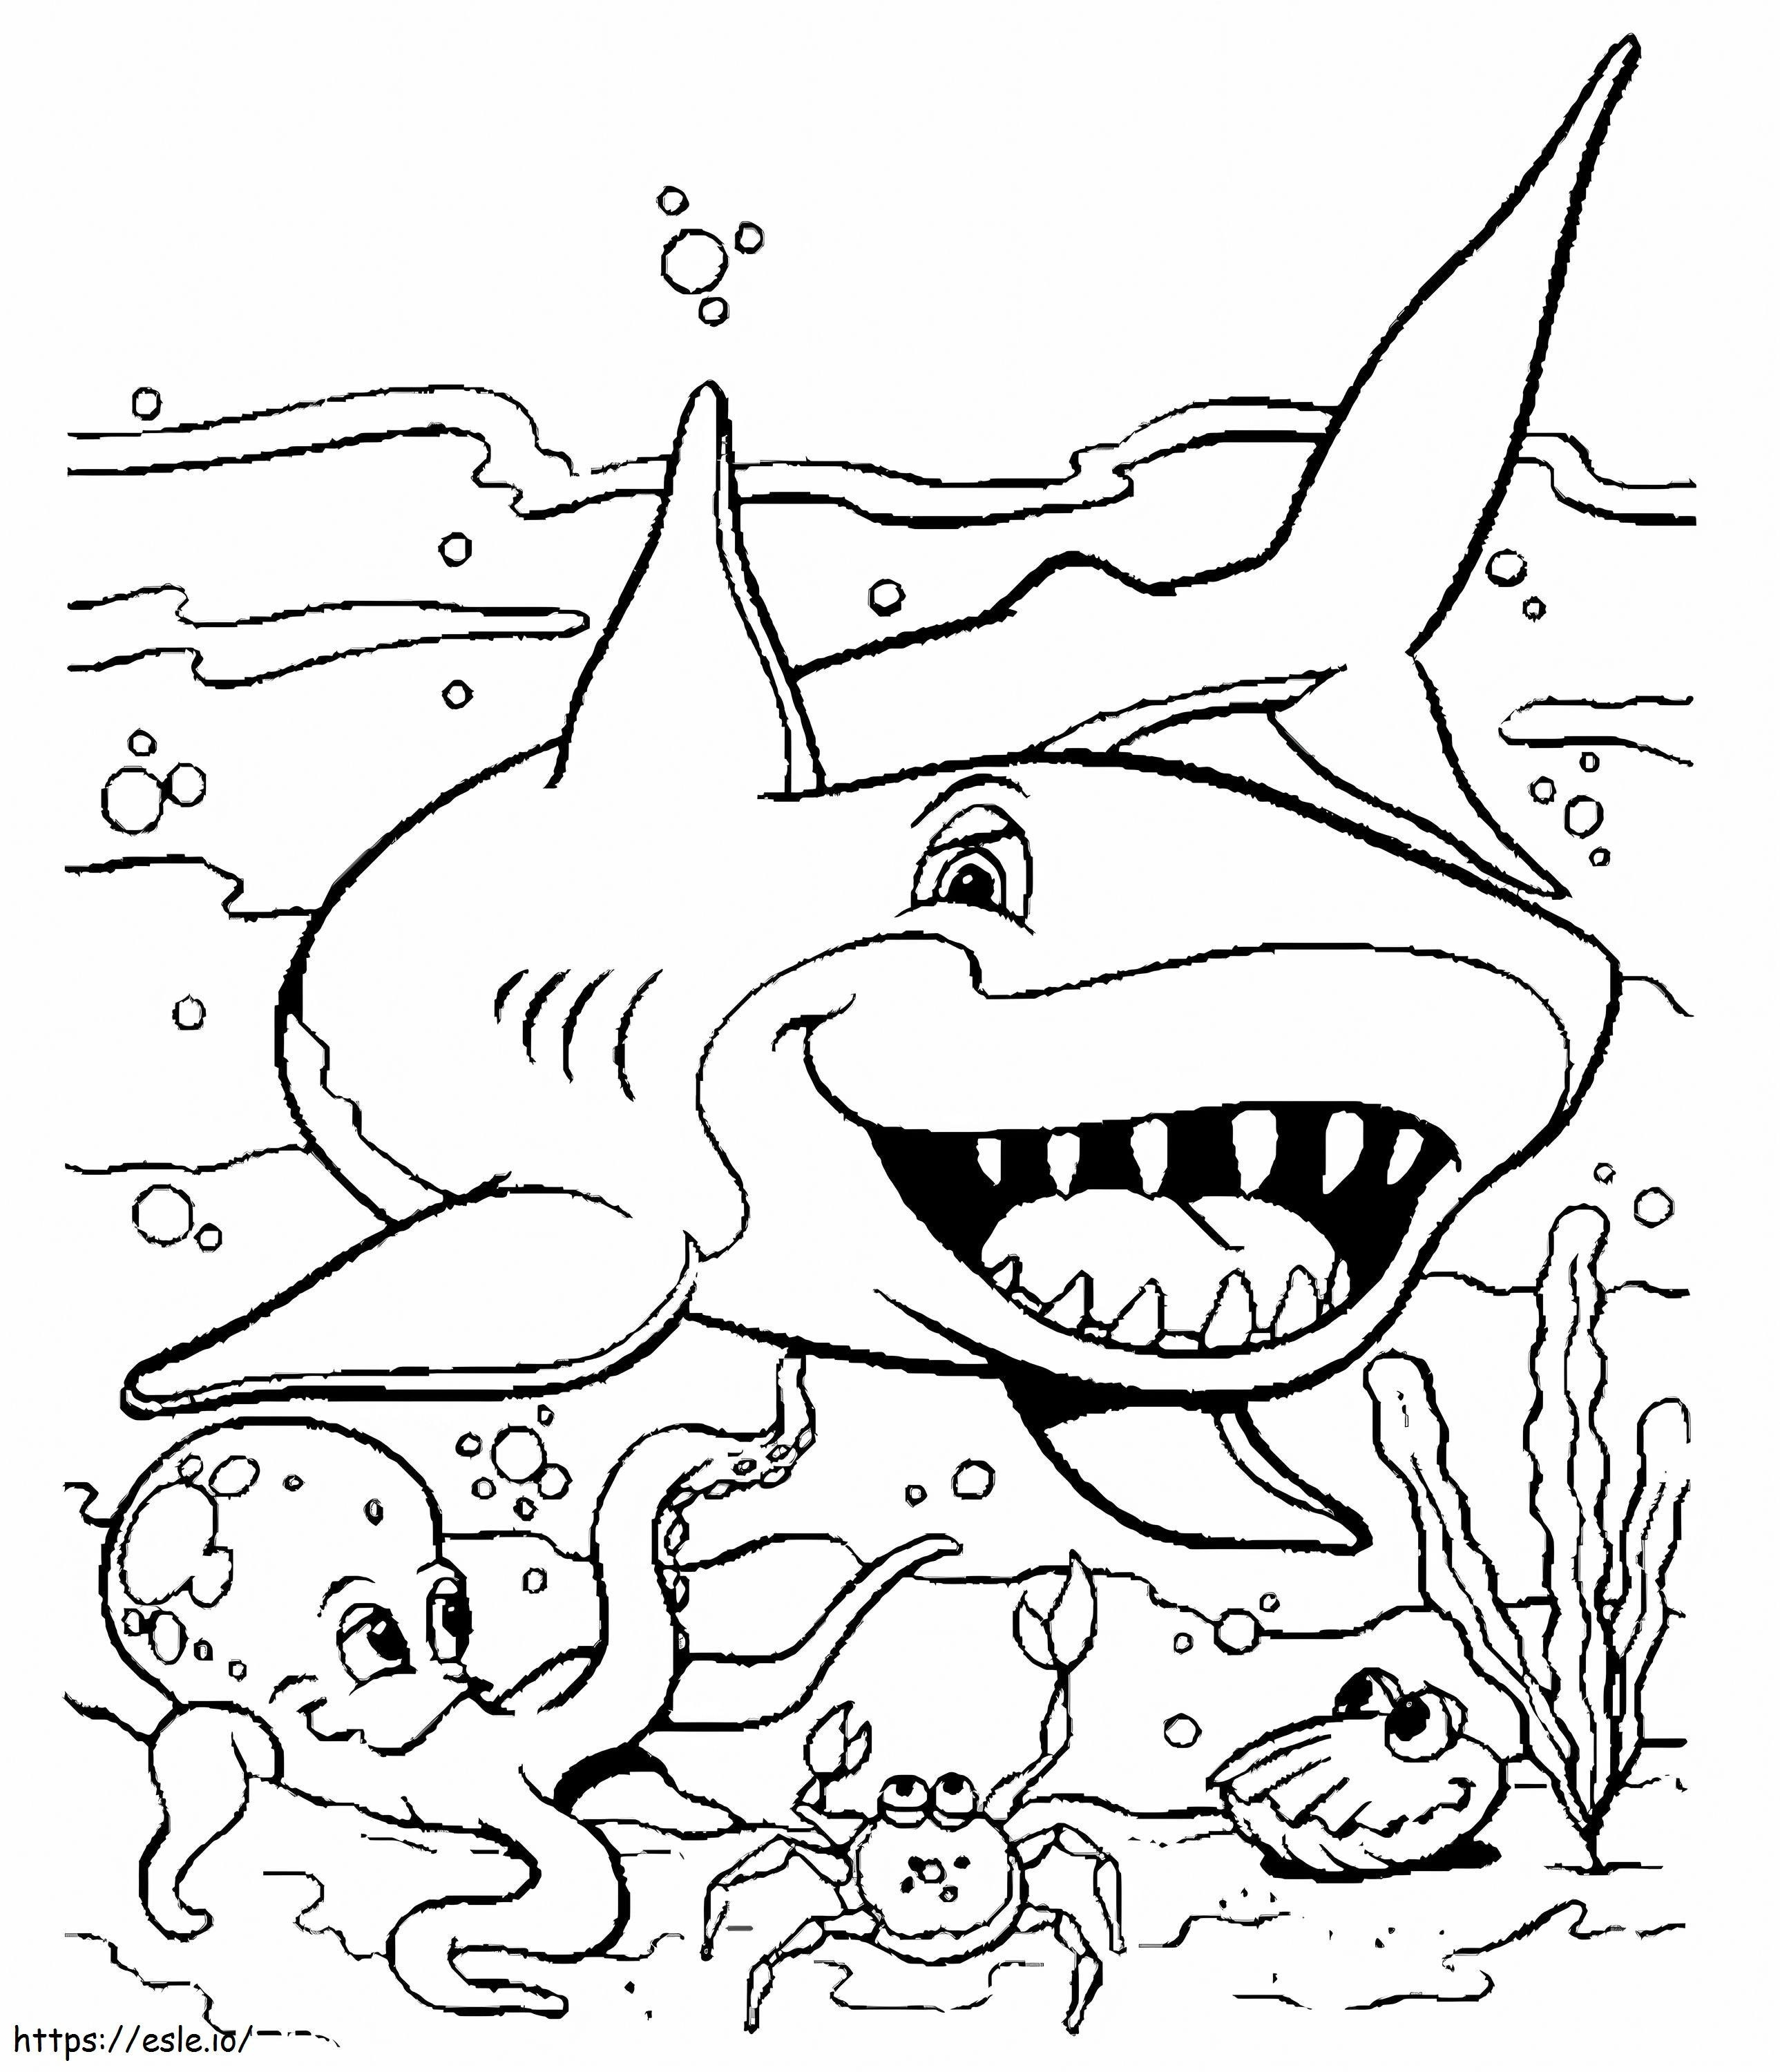 Funny Shark With Sea Animals coloring page